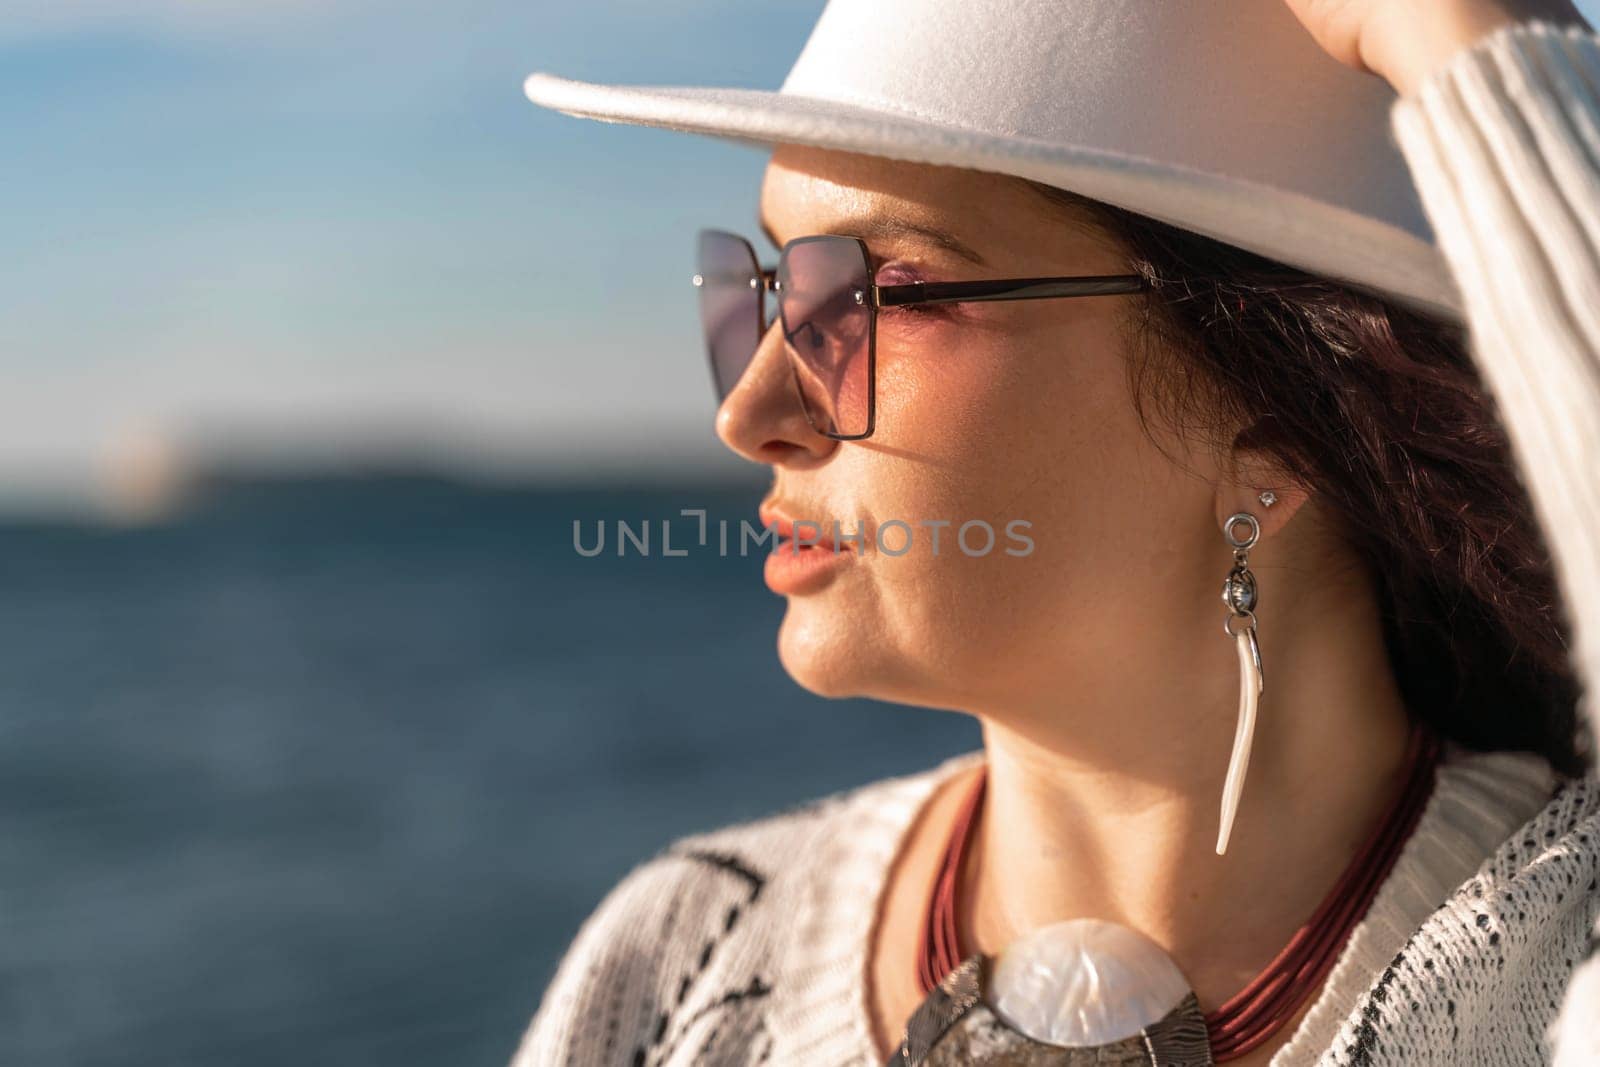 Portrait of a curly haired woman in a white hat and glasses on the background of the sea